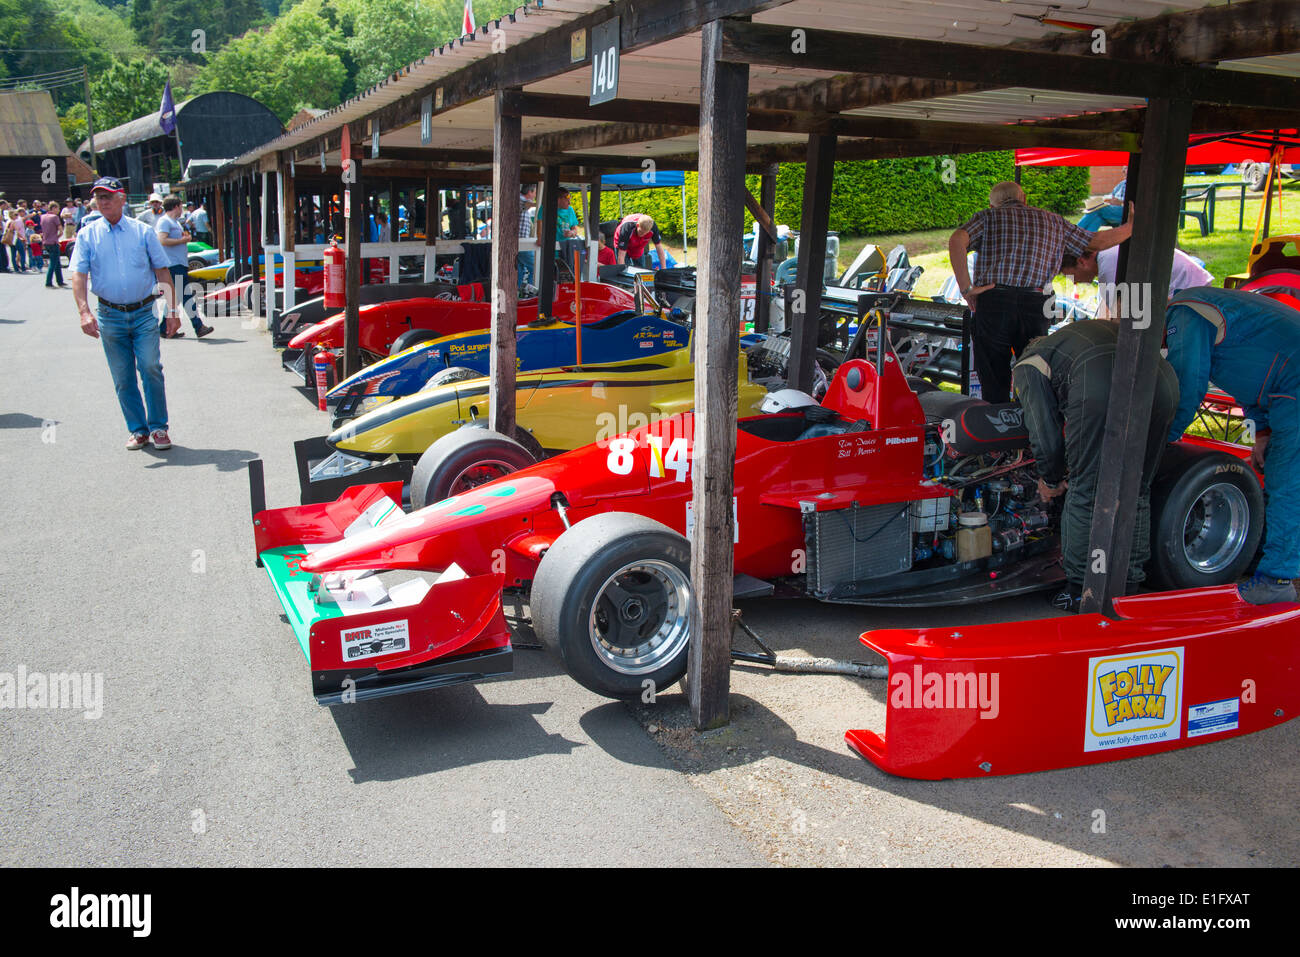 Racing cars in the paddock at Shelsley Walsh hill climb Worcestershire England UK Stock Photo